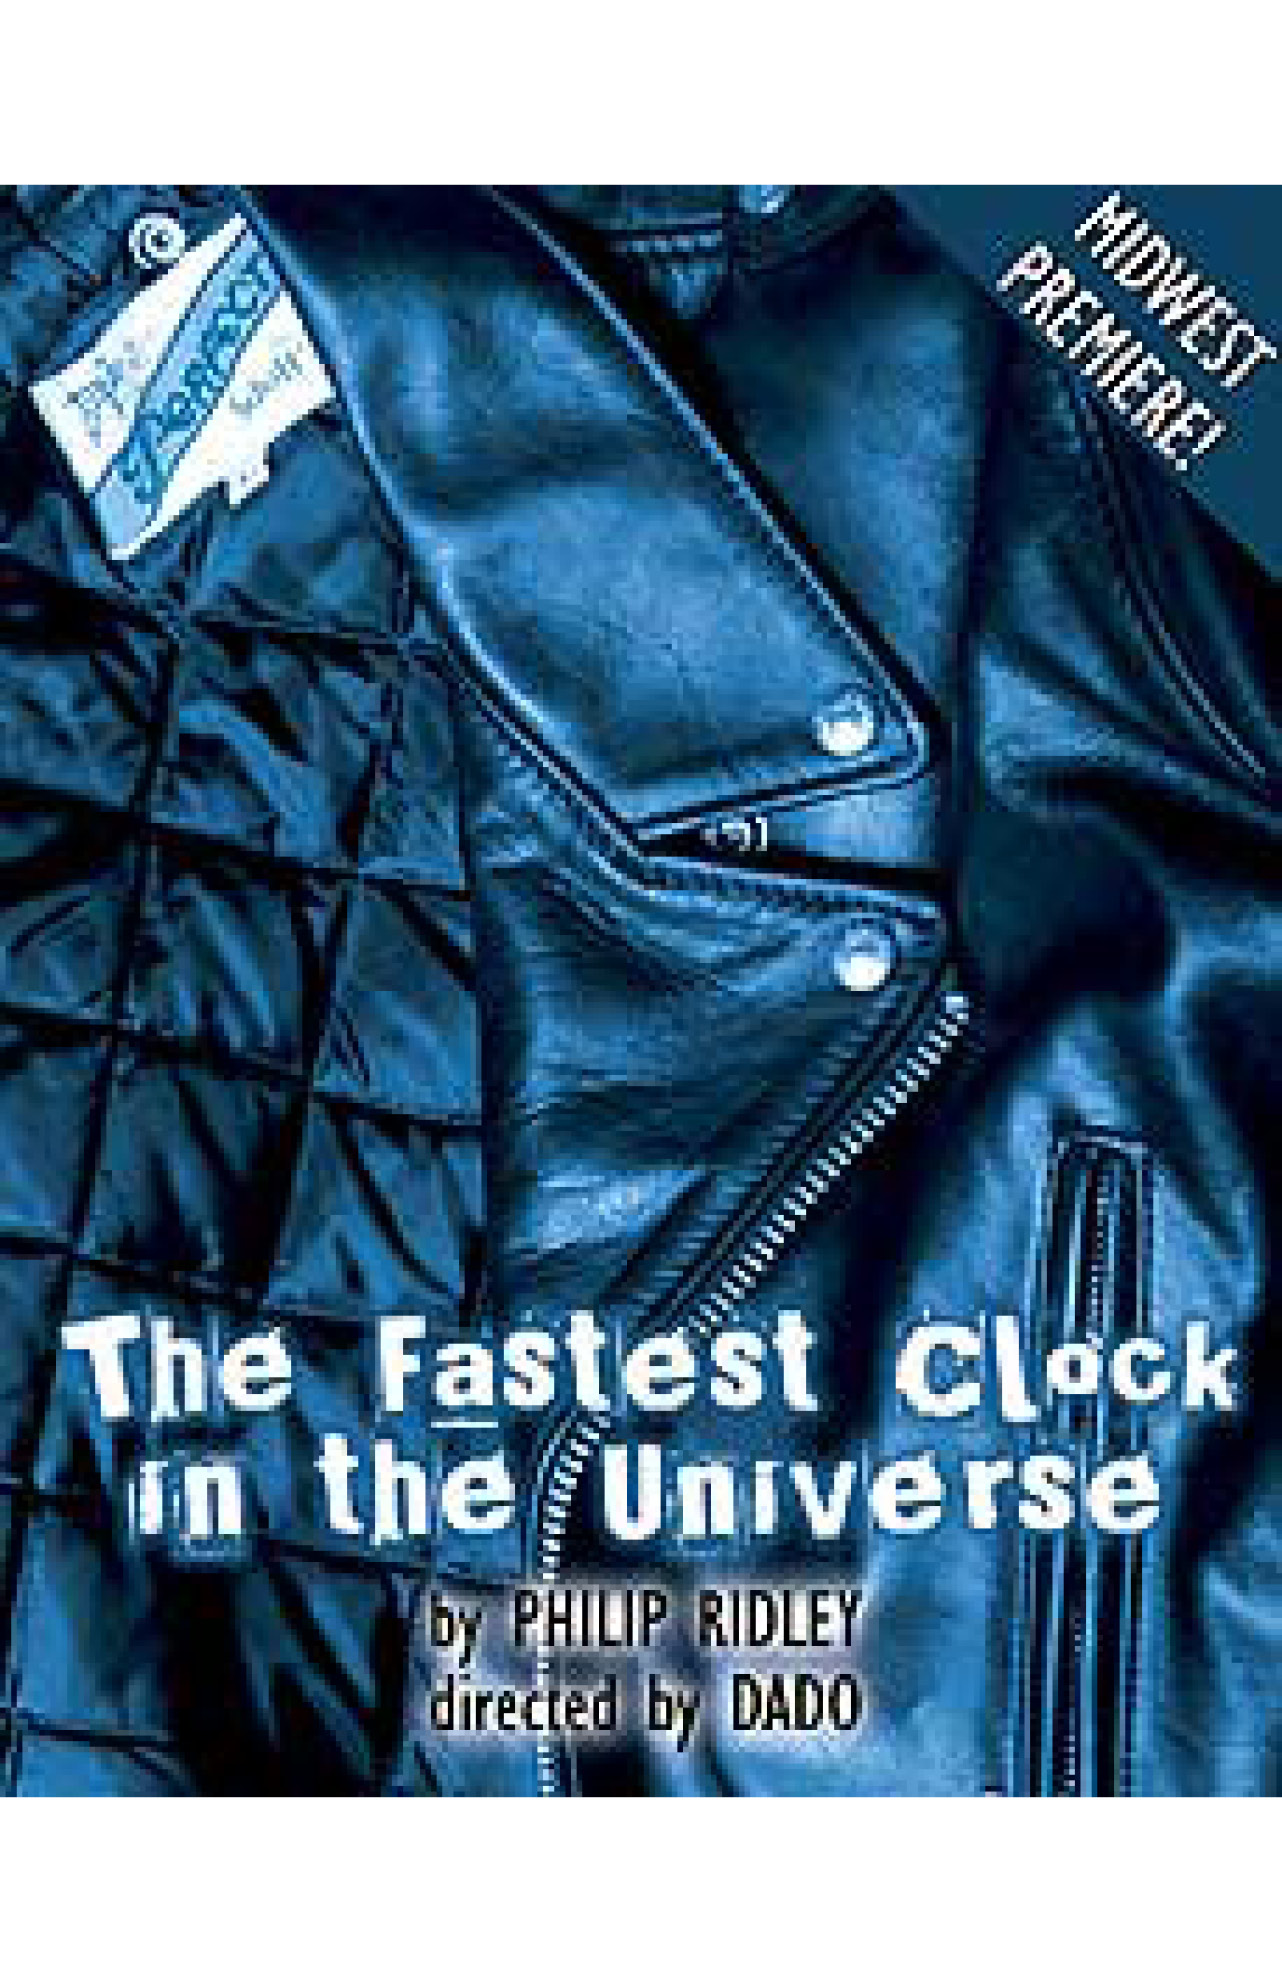 U.S. Premiere
The Fastest Clock in the Universe tells the story of Cougar Glass’ 19th birthday. His best friend, Captain Tock, has spared no expense providing all necessary party favors: a delectable cake, pointy hats, birthday cards from all the sexiest people, and red meat. Cougar himself has only invited a single guest, the adorable Foxtrot Darling, and may be too busy doting on him to notice your presence. But, parties are inevitably meant to be crashed, and when, subsequently, the crashing commences, Mr. Glass starts to sweat as the illusion on which his entire identity is balanced goes up in flames. The Fastest Clock in the Universe is a devilish romper room of a play which explores the difficulty inherent in appreciating our passing birthdays.